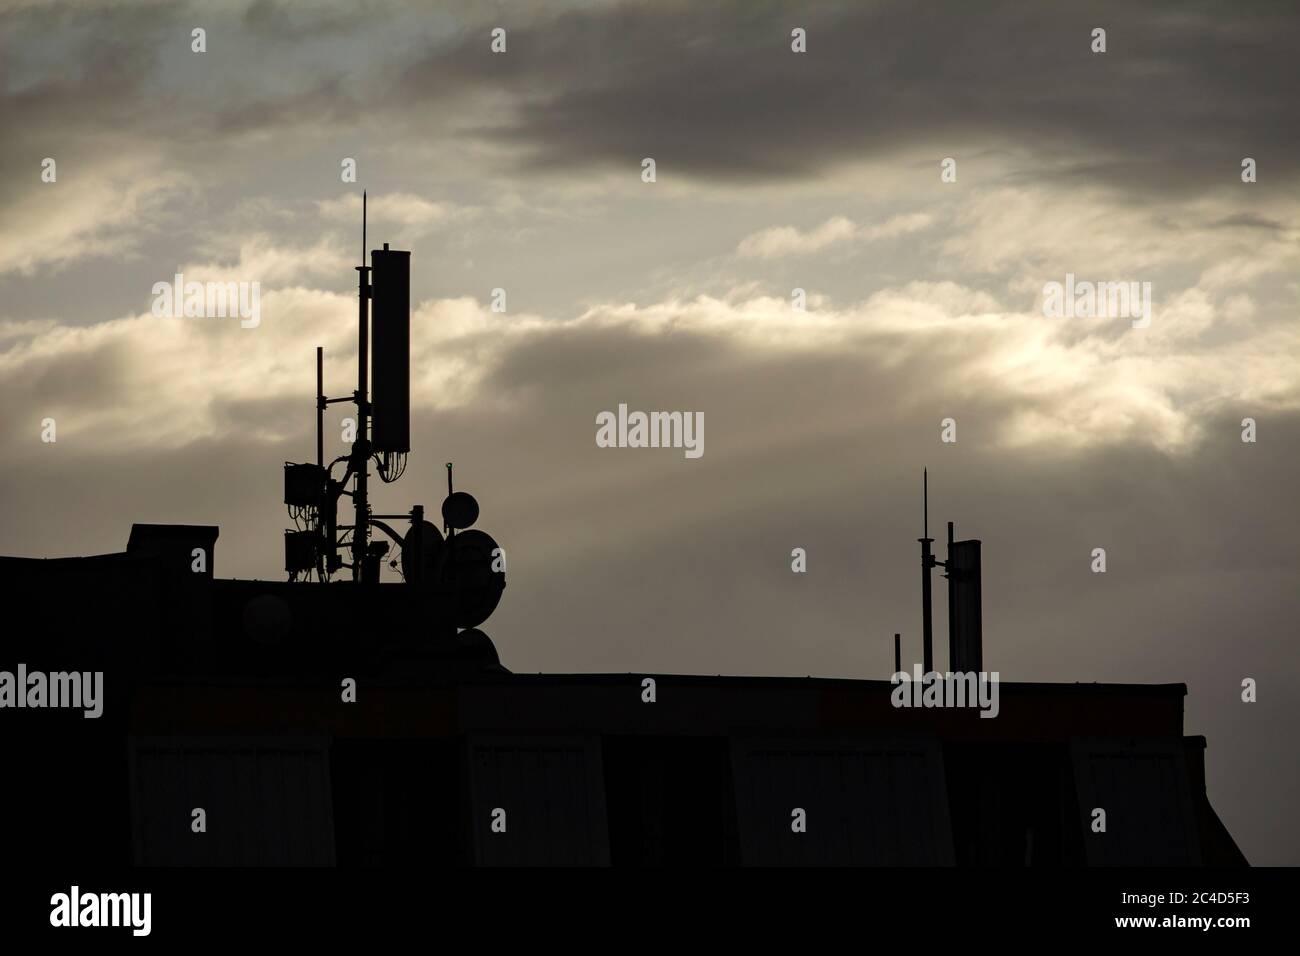 Cell phone tower silhouette on cloudy background Stock Photo